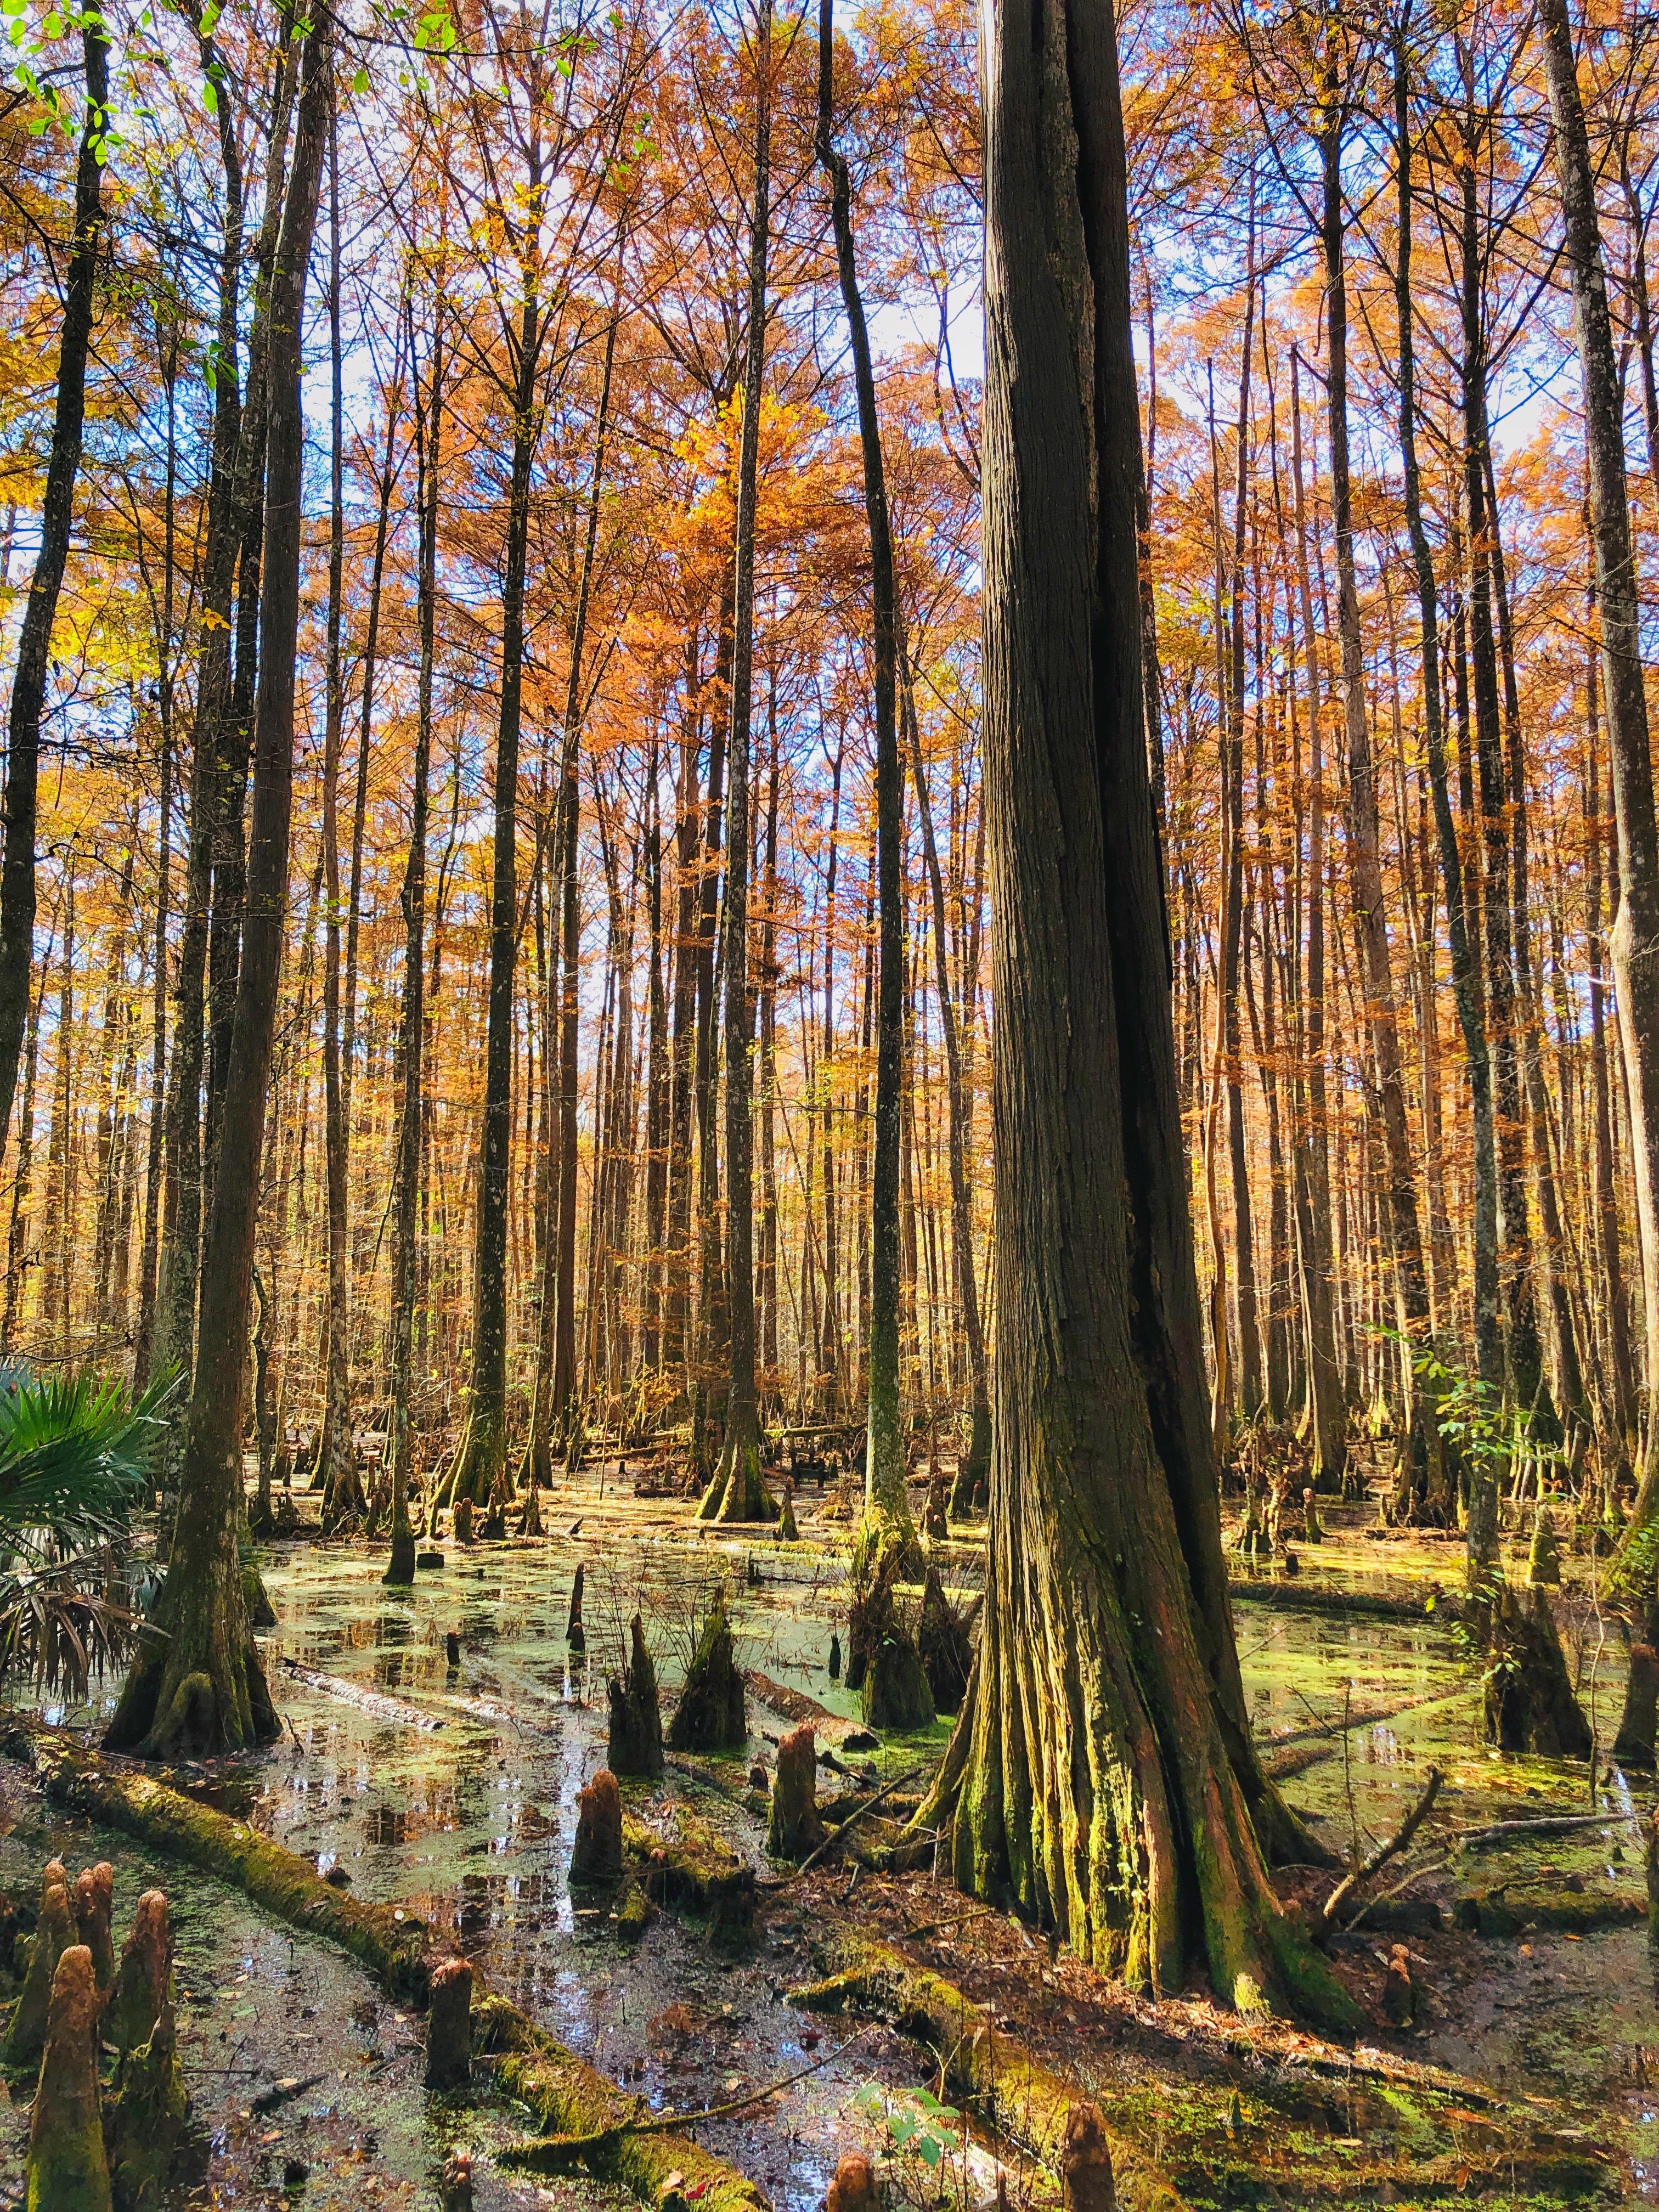 Tall trees in a swamp, displaying bright orange foliage.